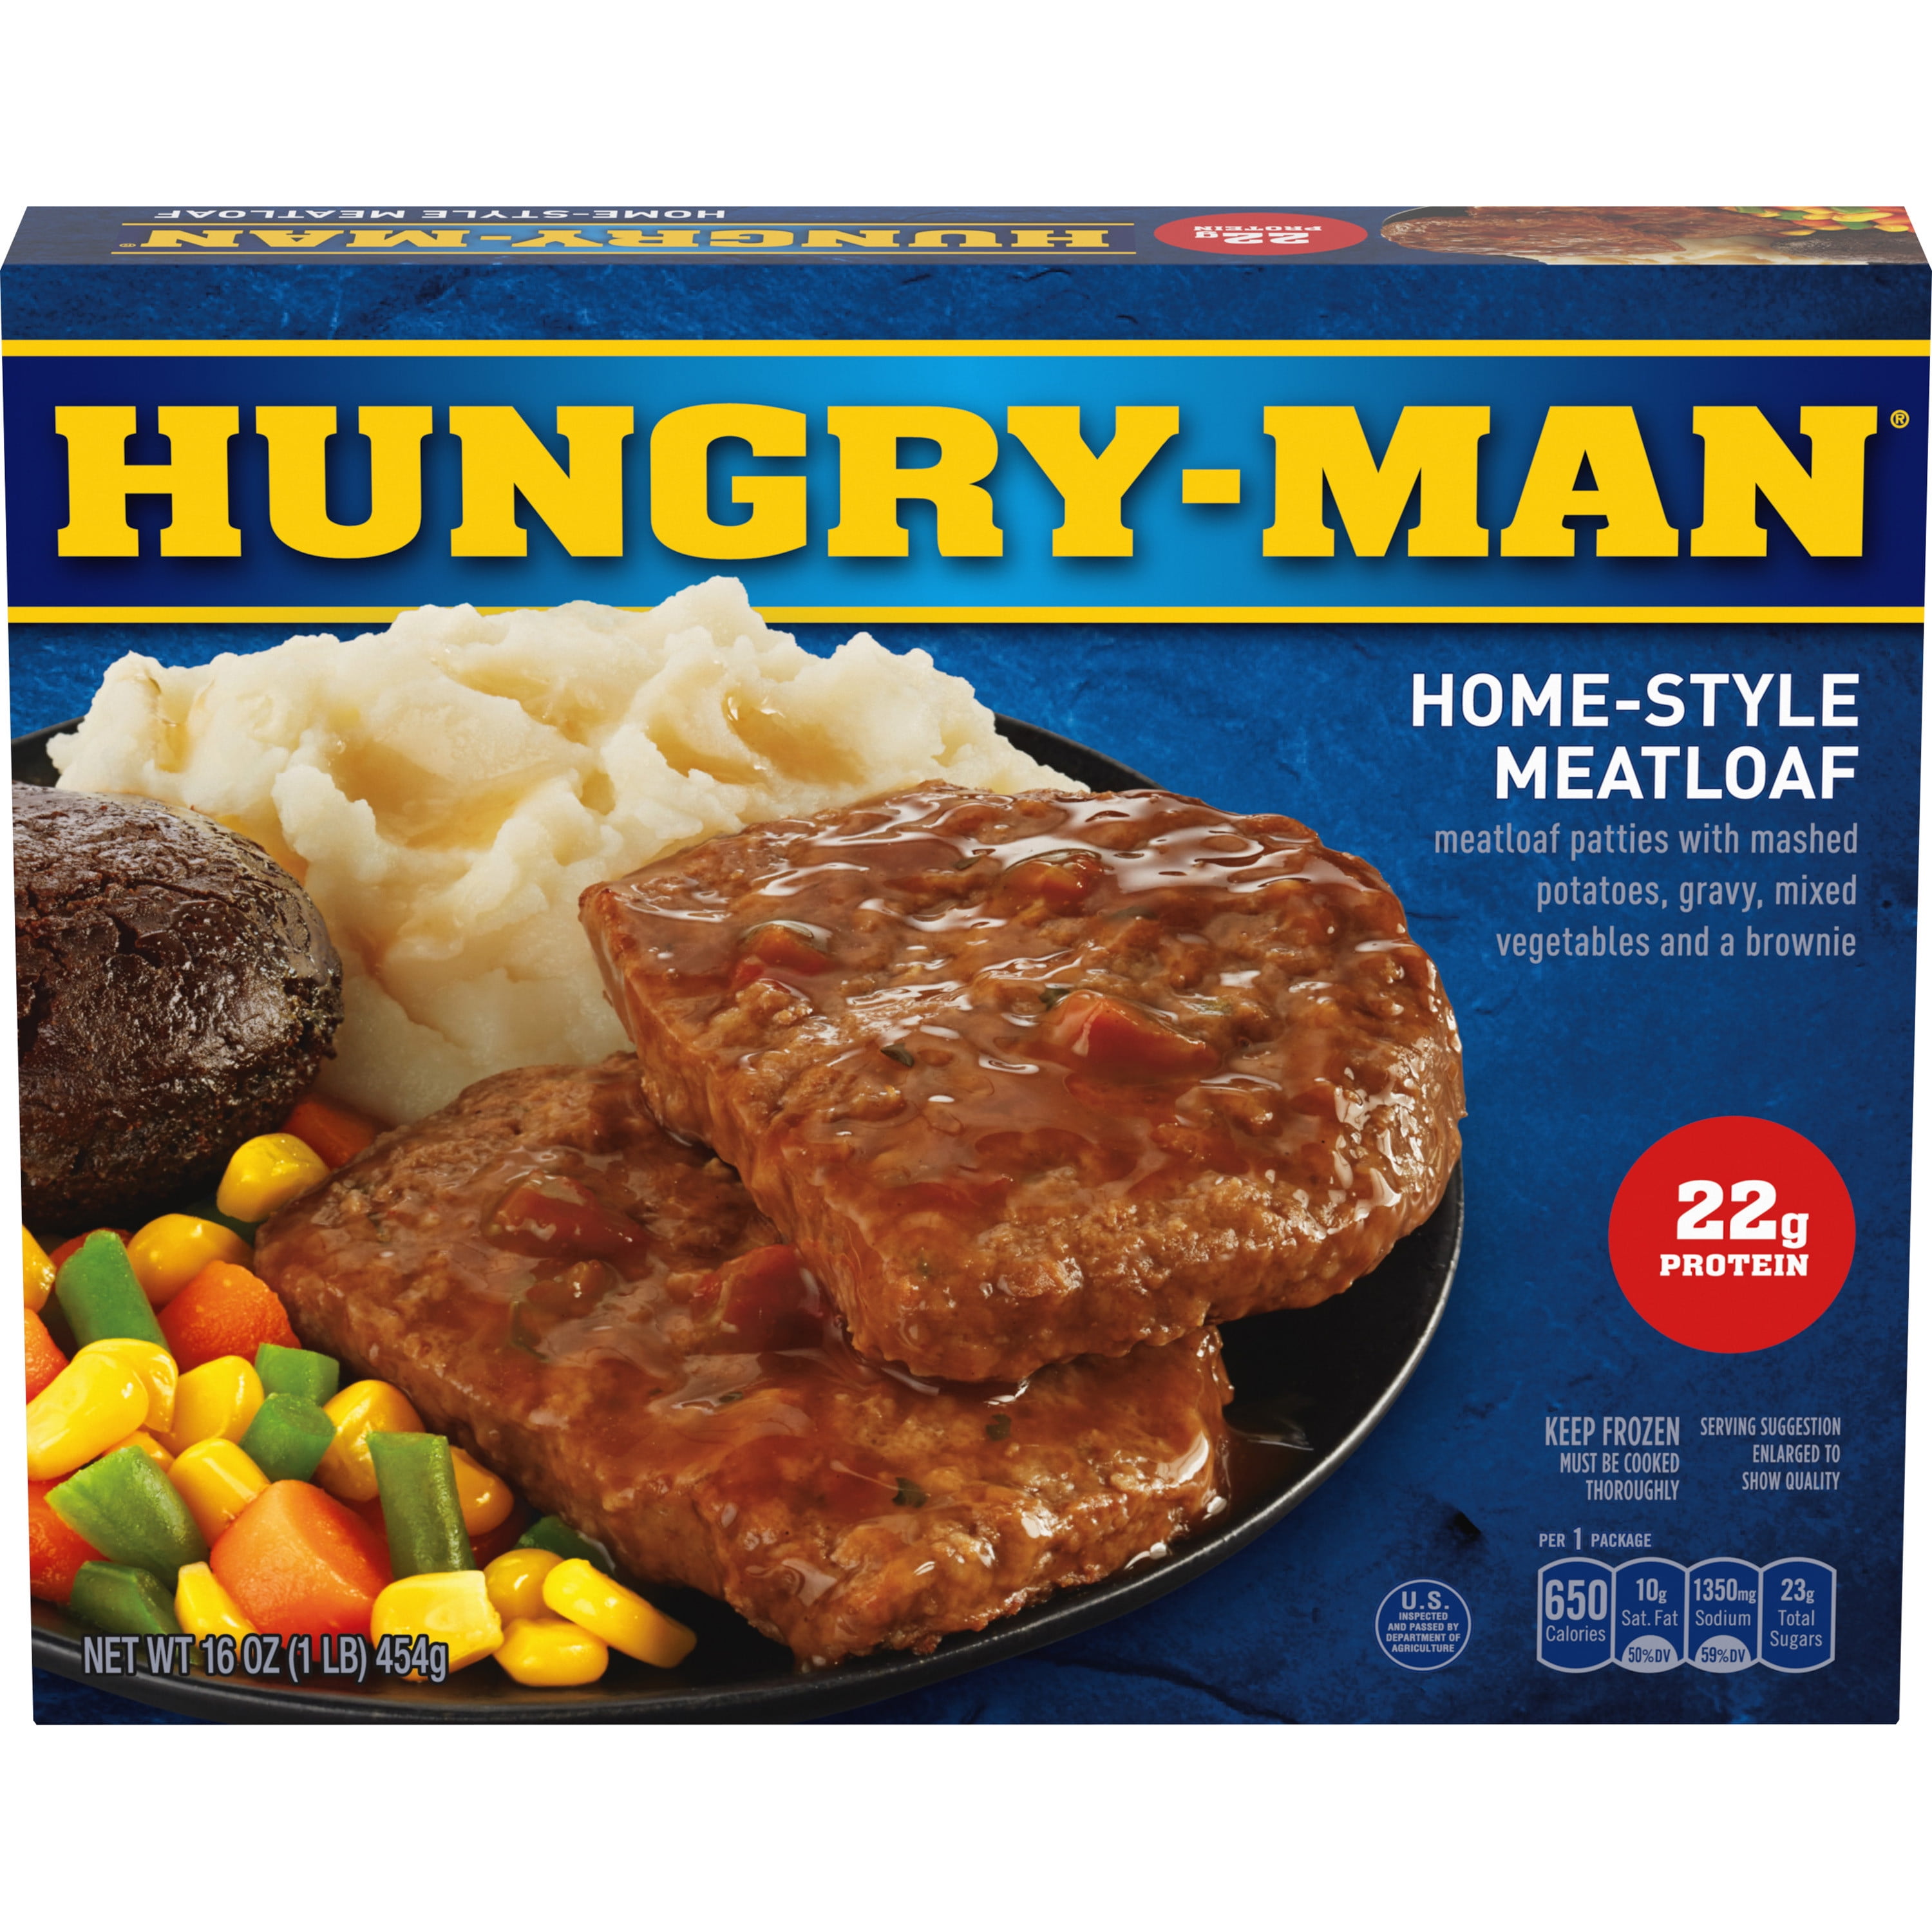 Hungry-Man Homestyle Meatloaf Frozen Dinner, 16 oz (Frozen)